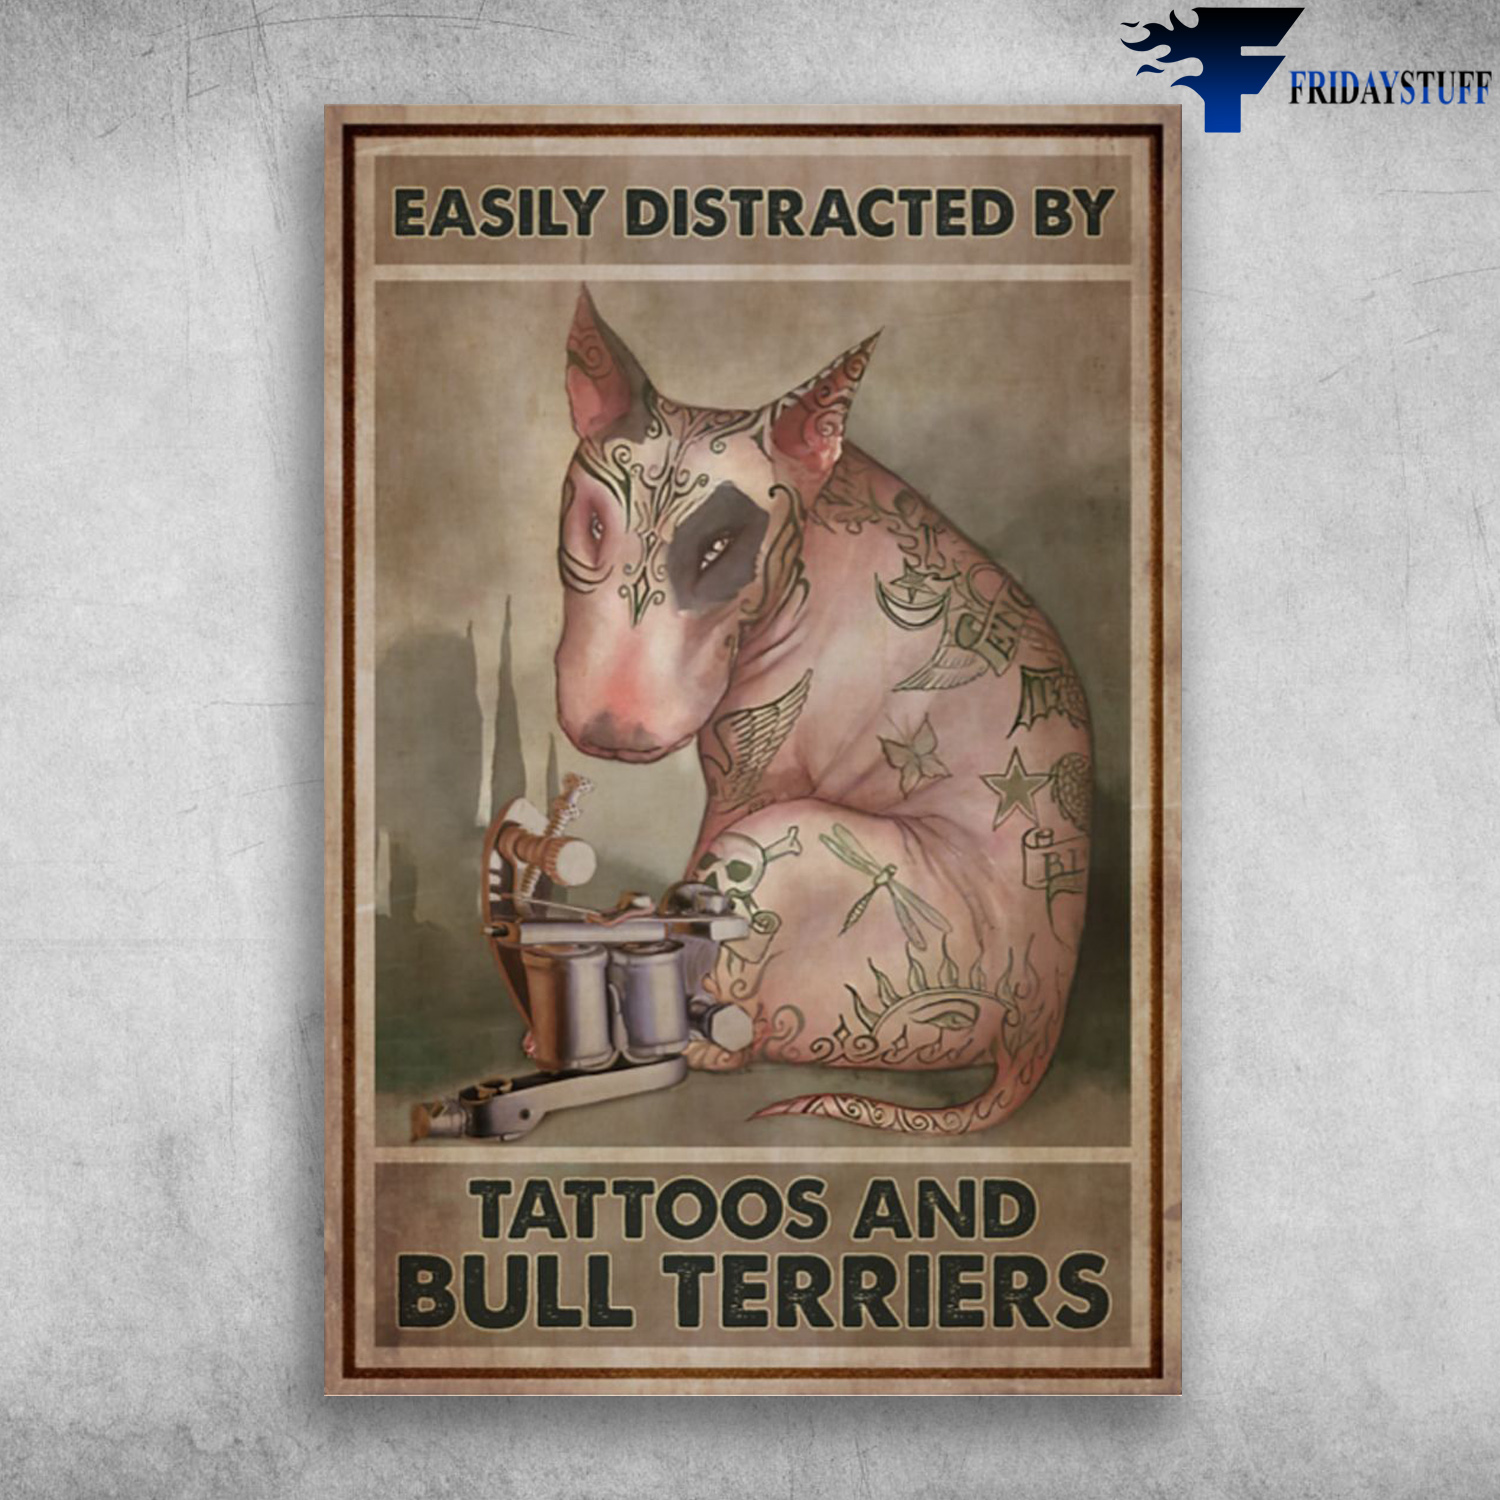 Tattooed Bull Terrier - Easily Distracted By Tattoos And Bull Terriers